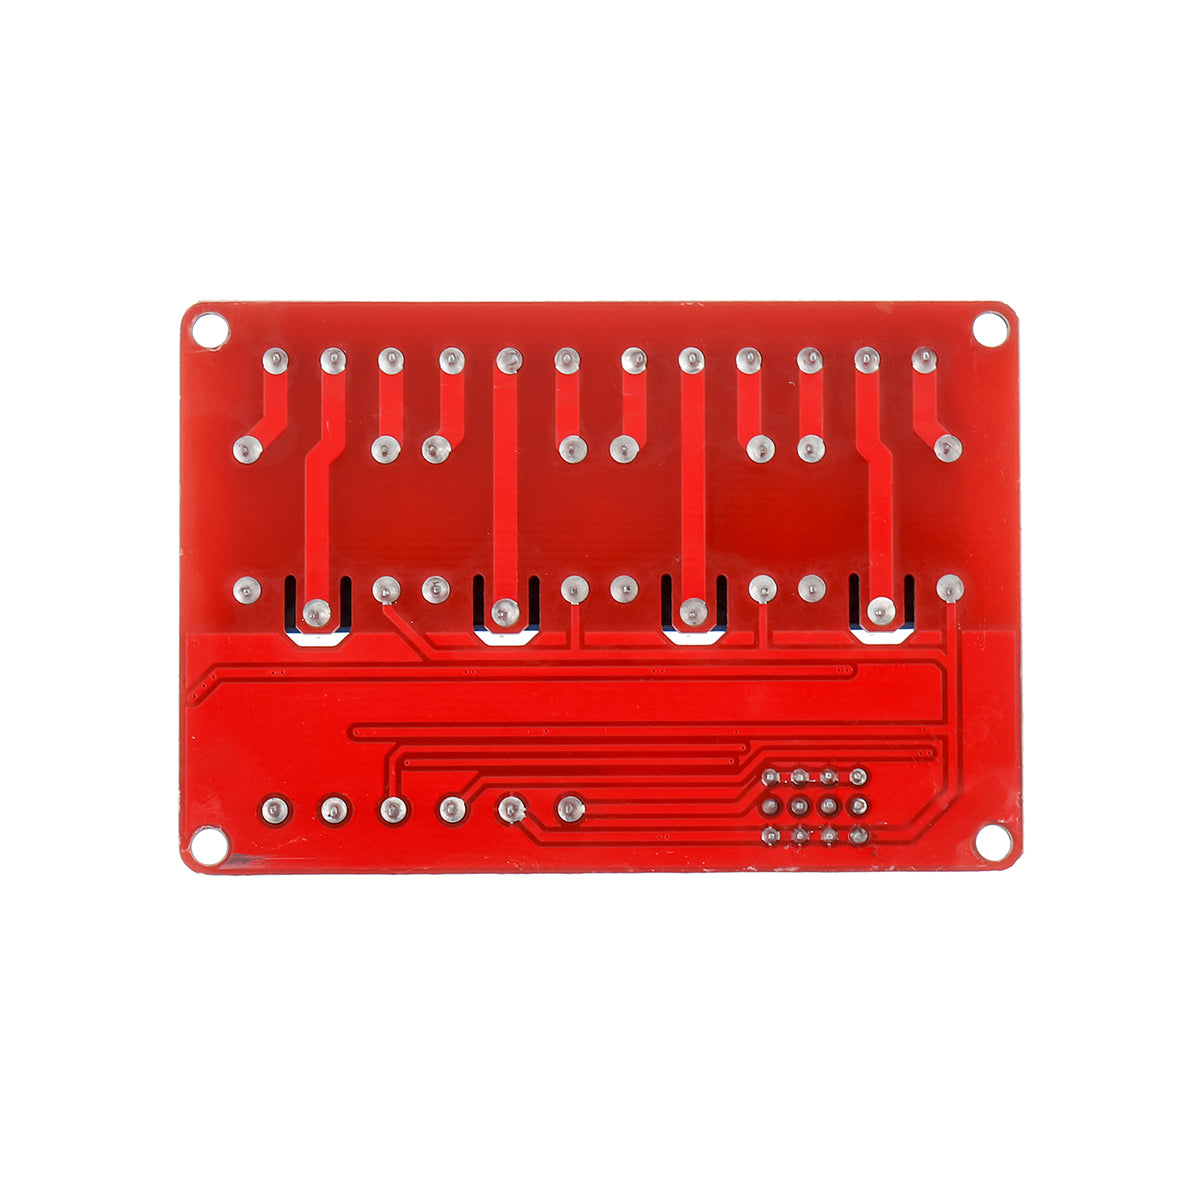 12V 1 / 2 / 4 / 8 Channel Relay High Low Level Optocoupler Module For PI - Auto GoShop